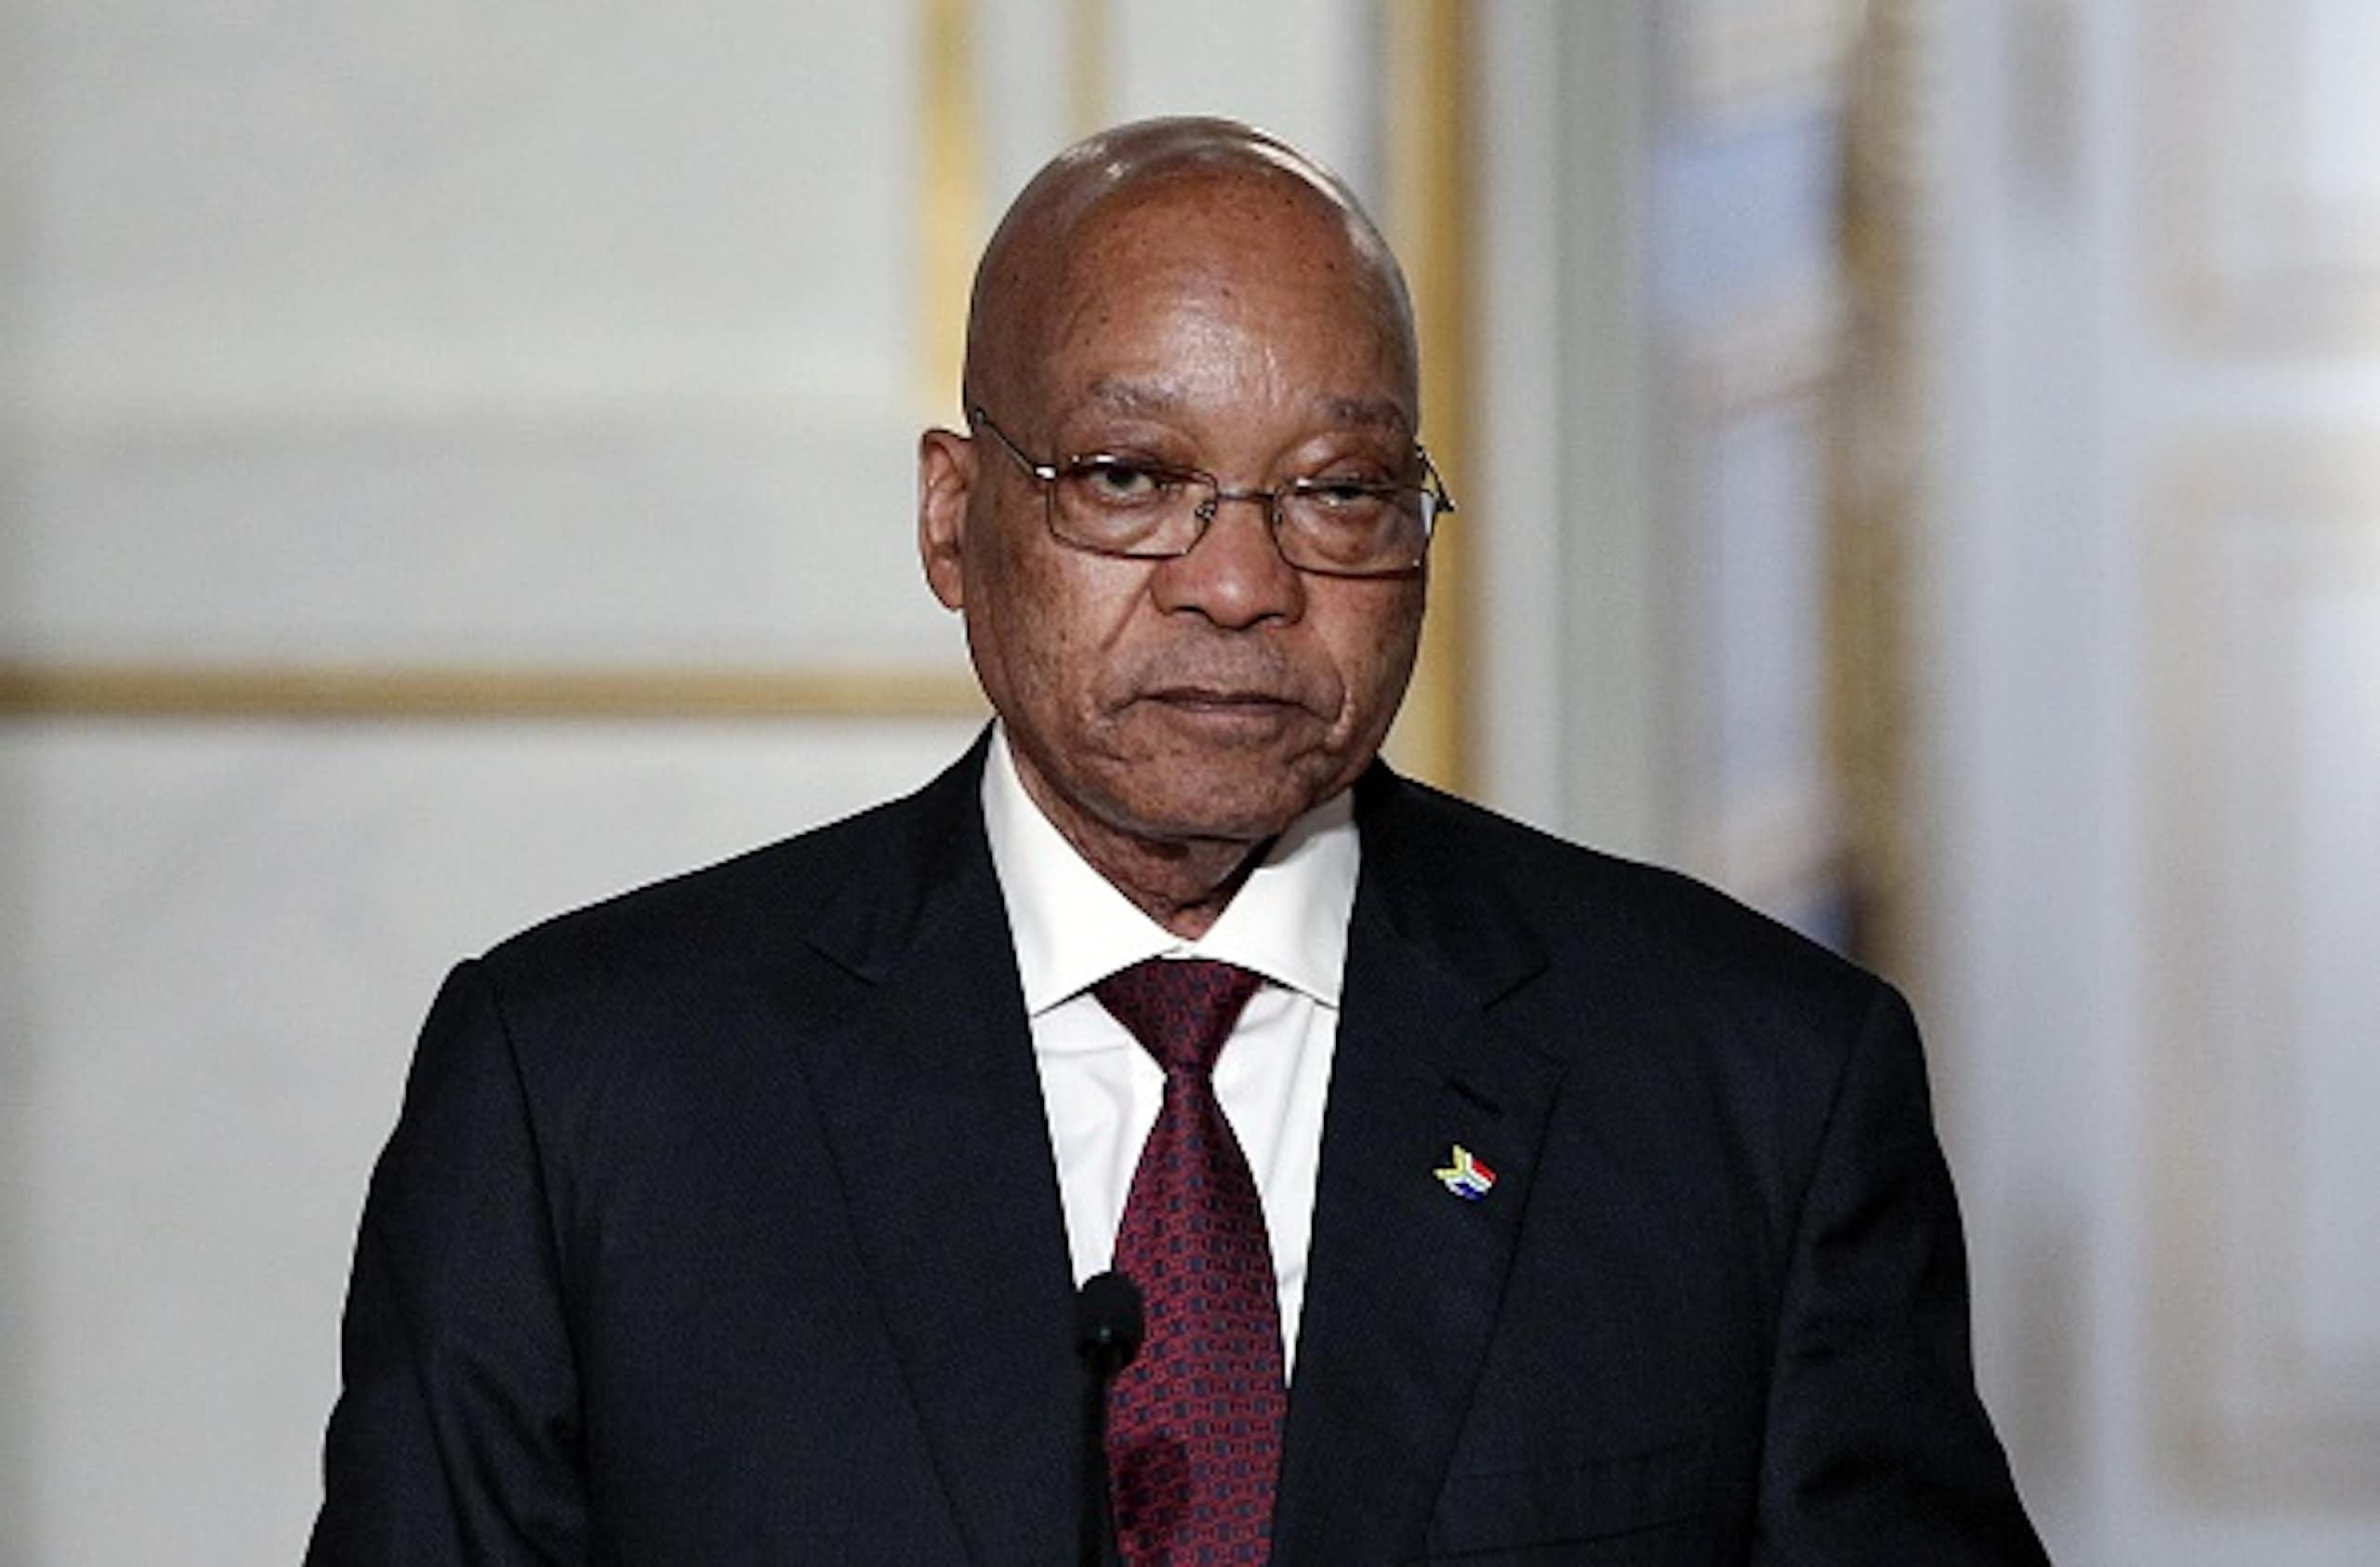 The two faces of Jacob Zuma – former South African president campaigns to unseat the ANC he once led. Who supports him and why?